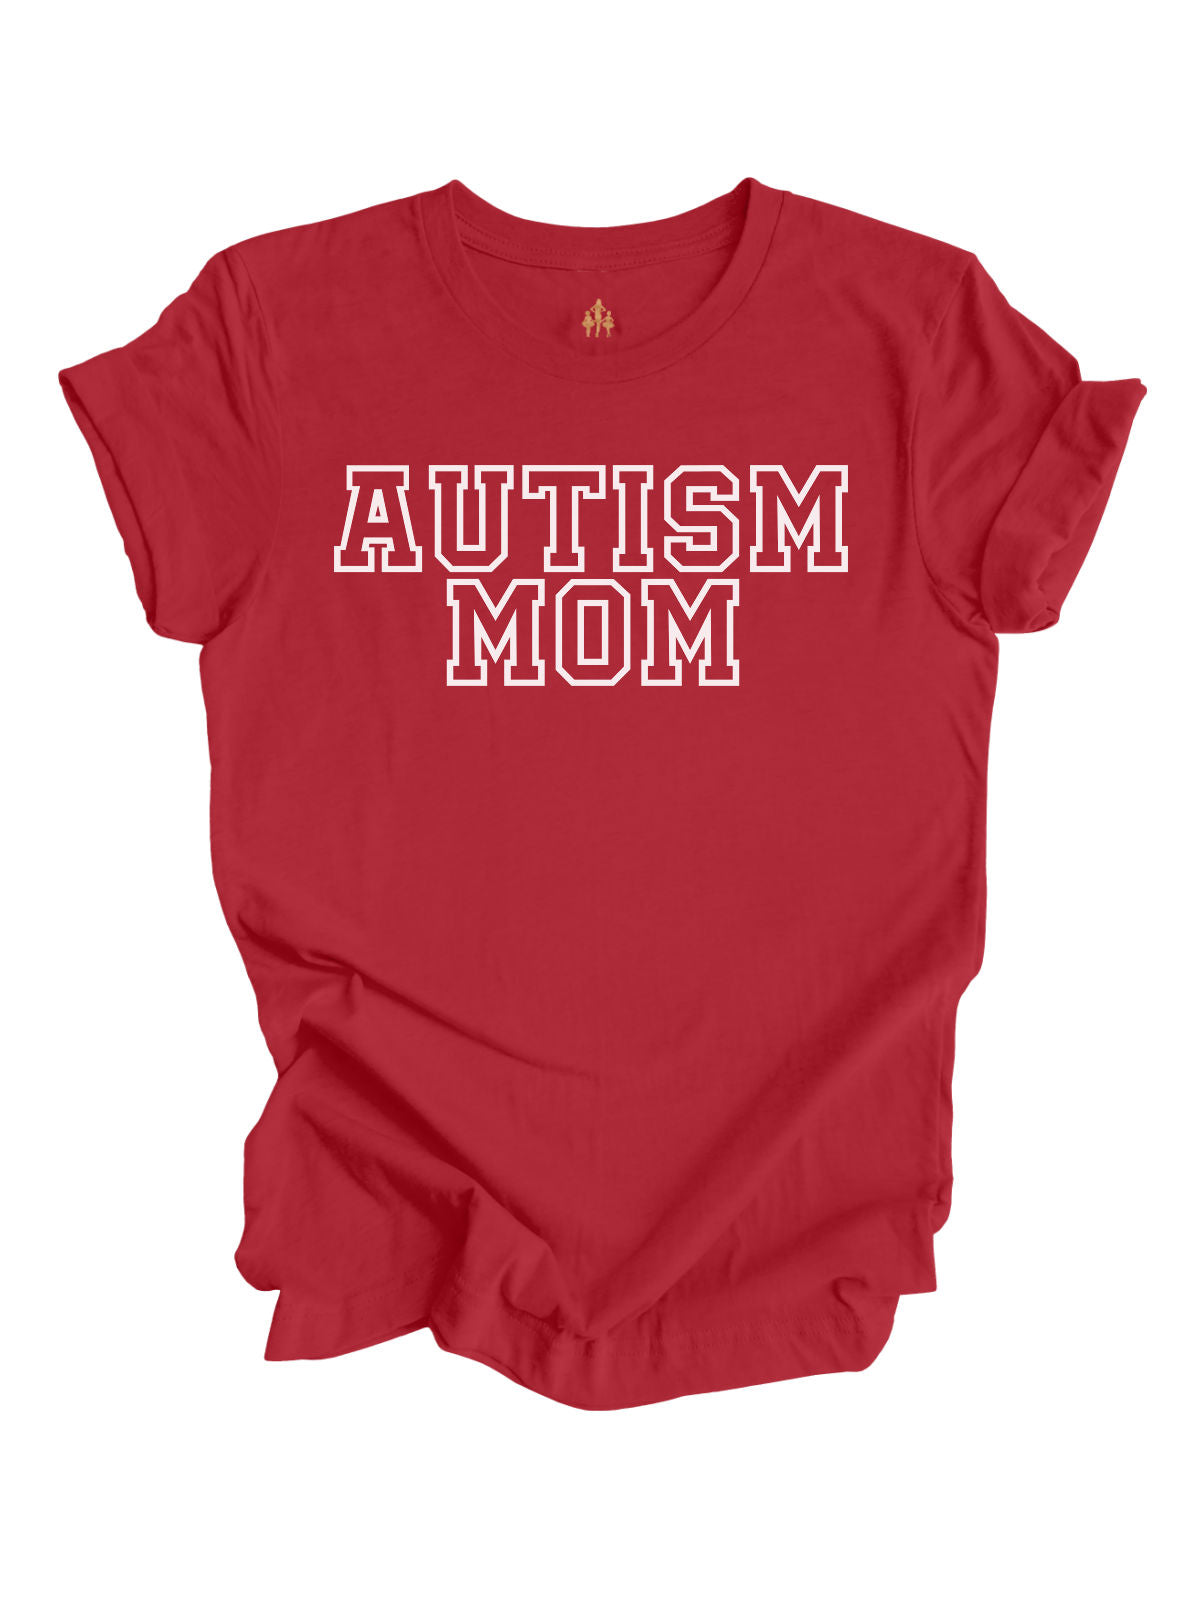 Autism Mom Varsity Shirt in Red